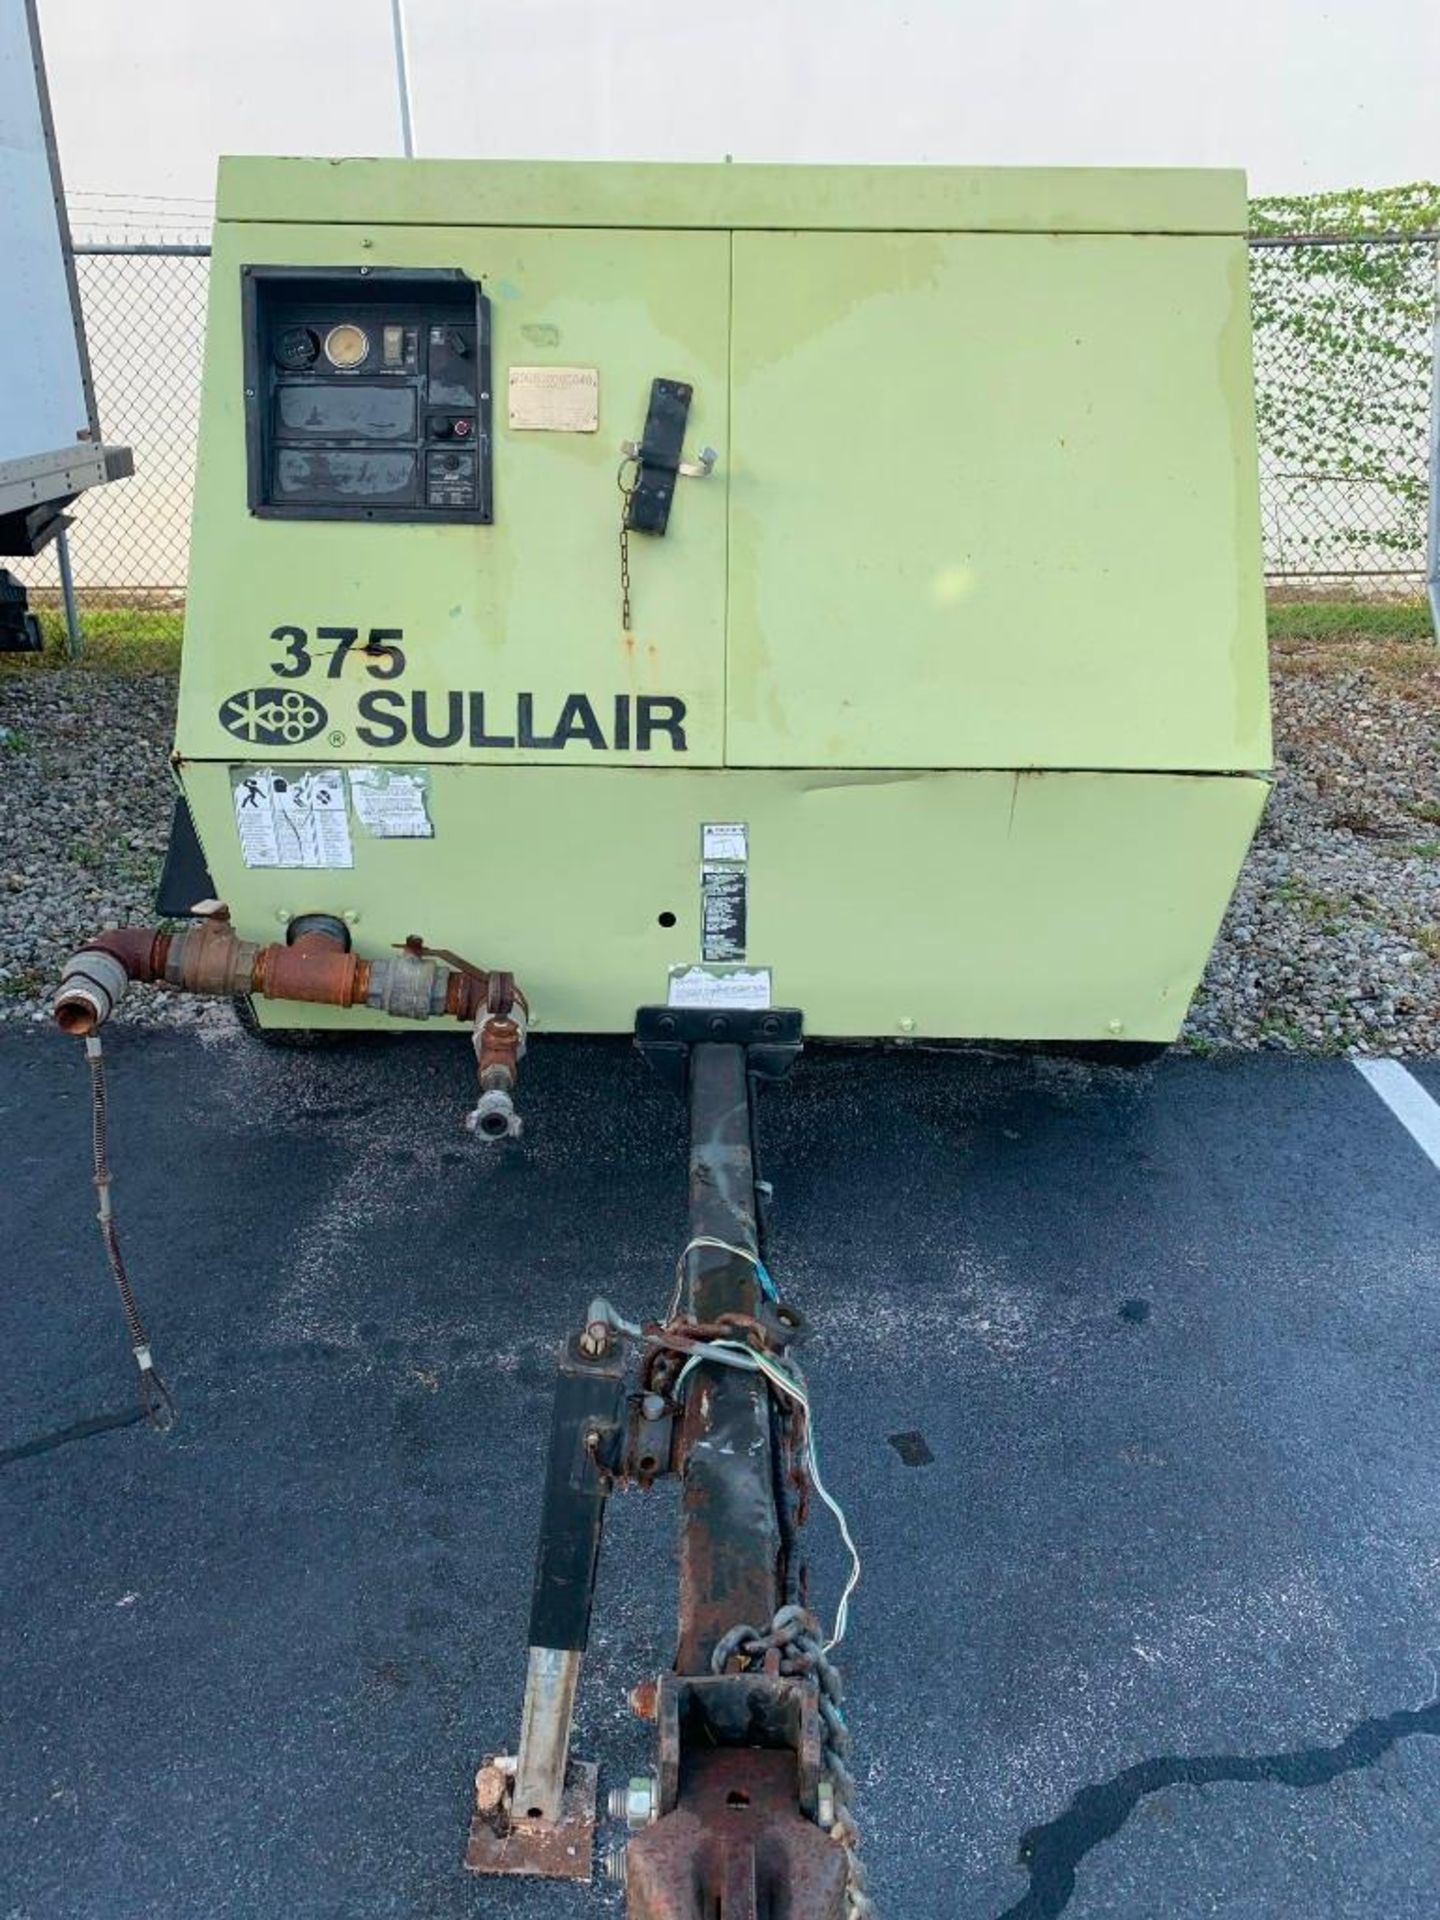 SULLAIR 375 AIR COMPRESSOR, DIESEL, JOHN DEERE ENGINE, TOW BEHIND, BILL OF SALE ONLY , CONDITION UNK